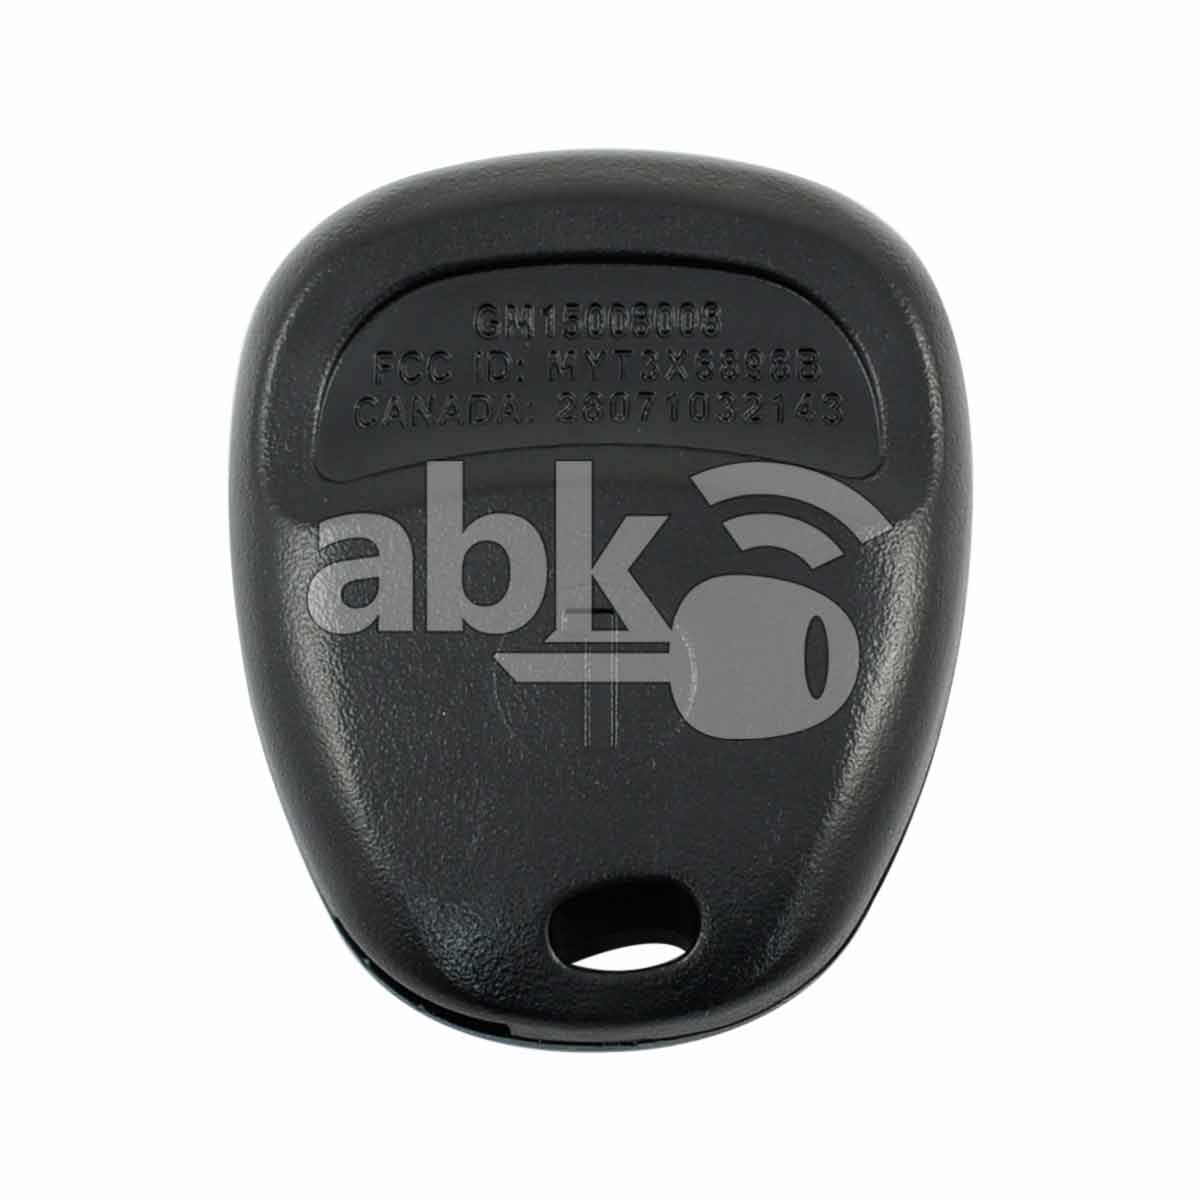 Chevrolet Buick 2002+ Remote Control Cover 3Buttons - ABK-3986 - ABKEYS.COM